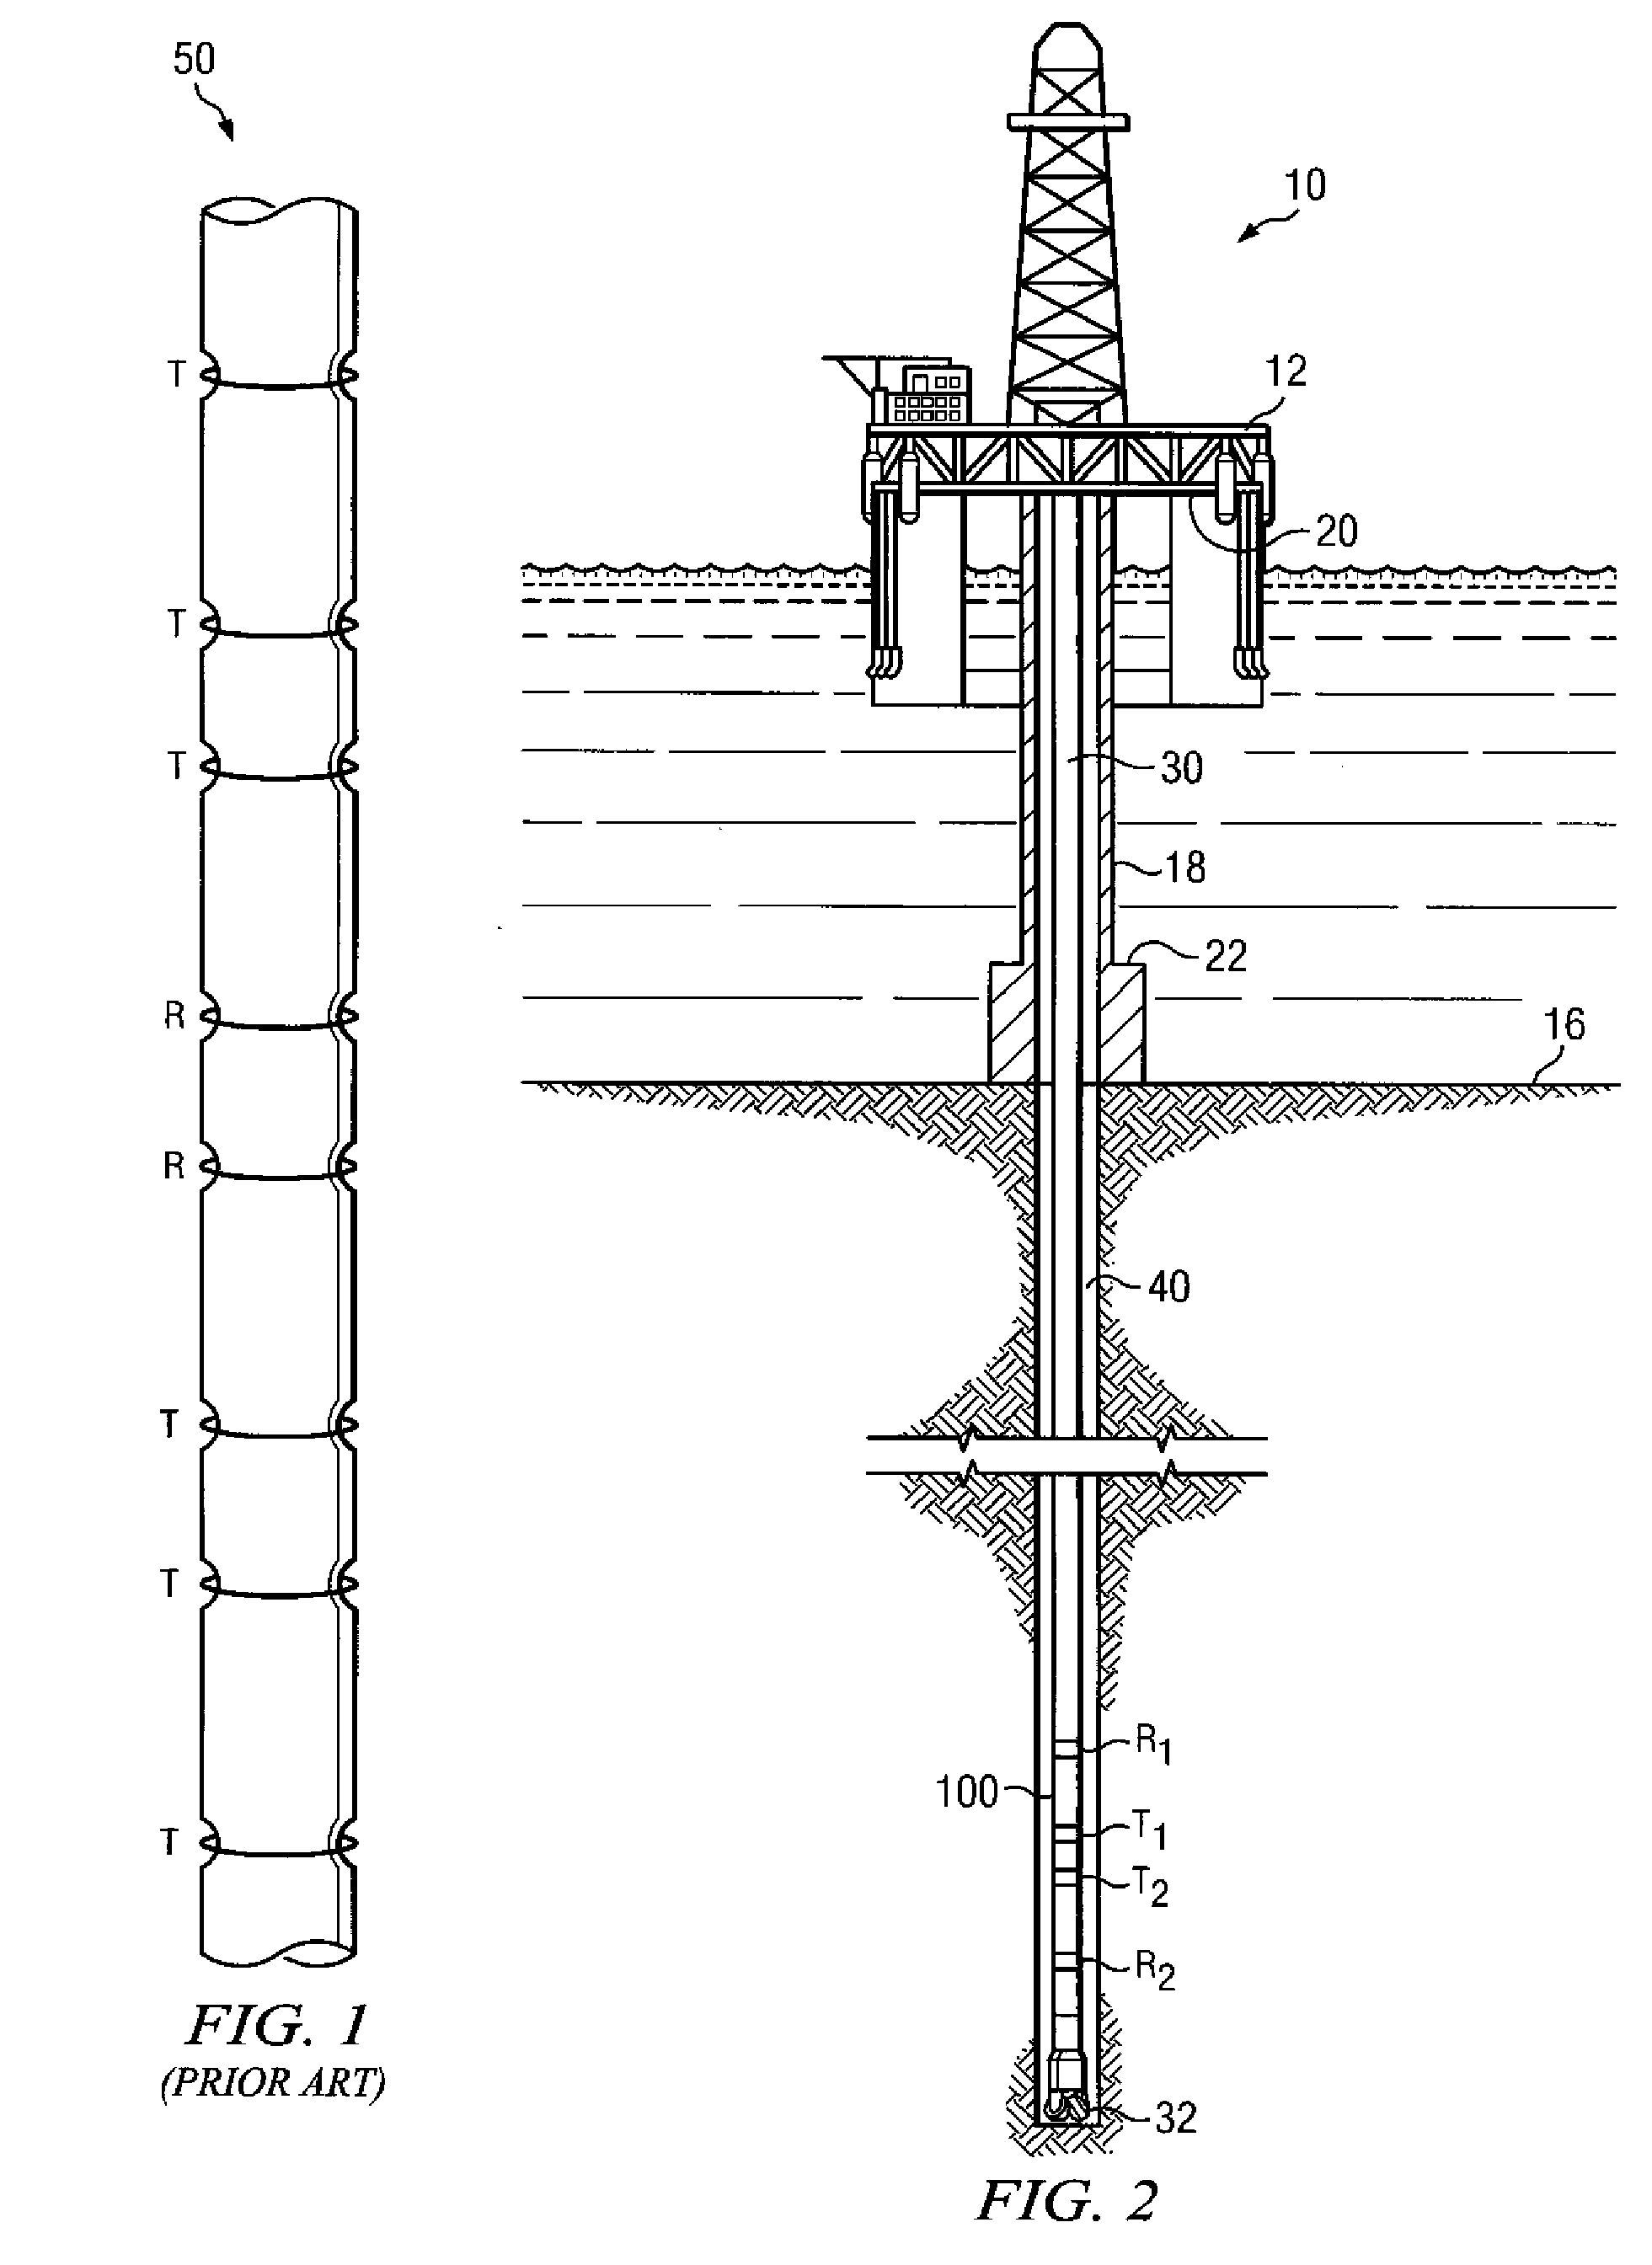 Apparatus and Method for Downhole Electromagnetic Measurement While Drilling